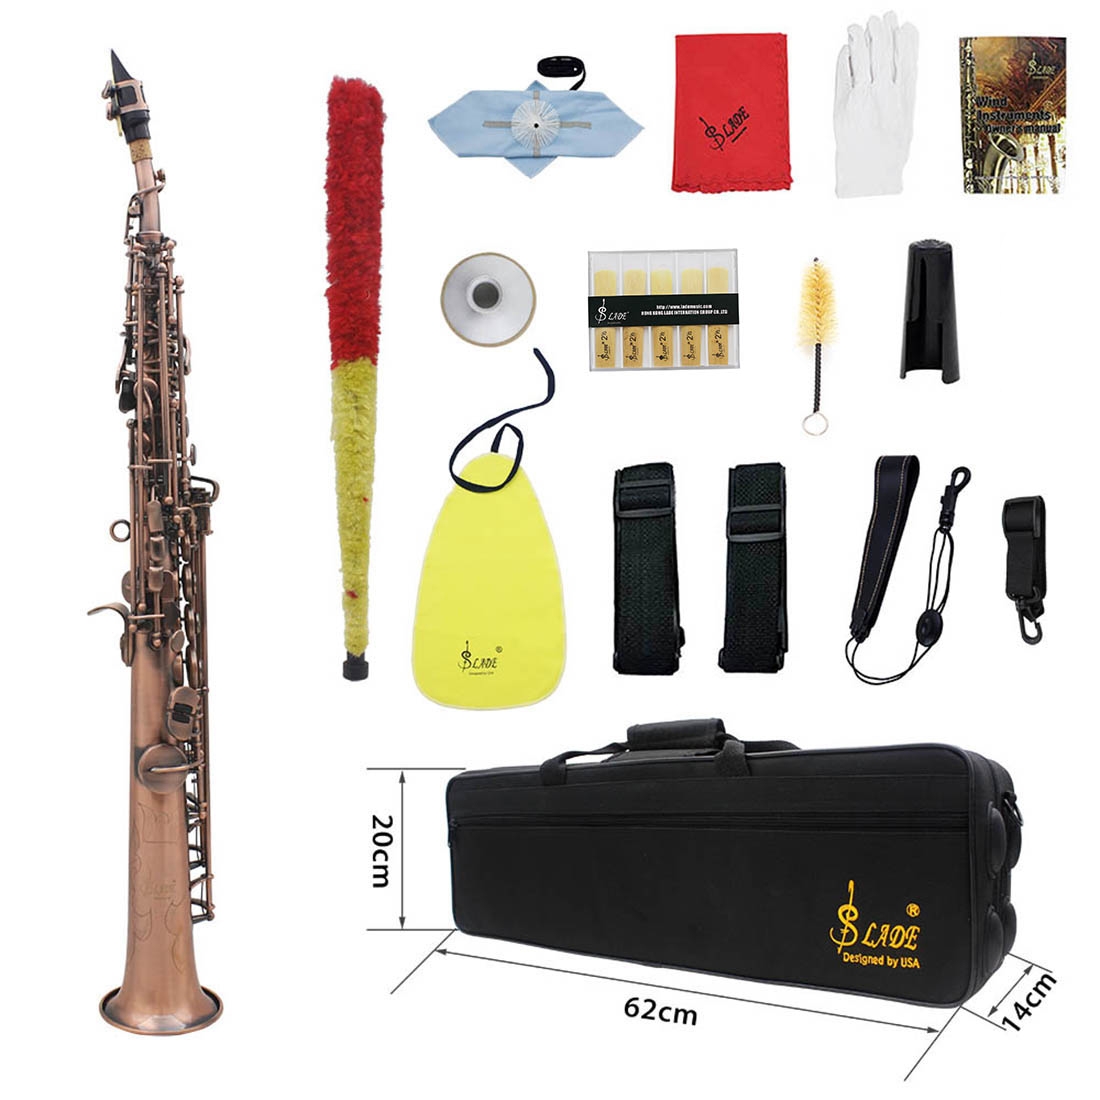 SLADE Red Bronze Straight Bb Soprano Saxophone Sax Woodwind Instrument Abalone Shell Key Carve Pattern with Case Gloves Cleaning Cloth Straps Brush